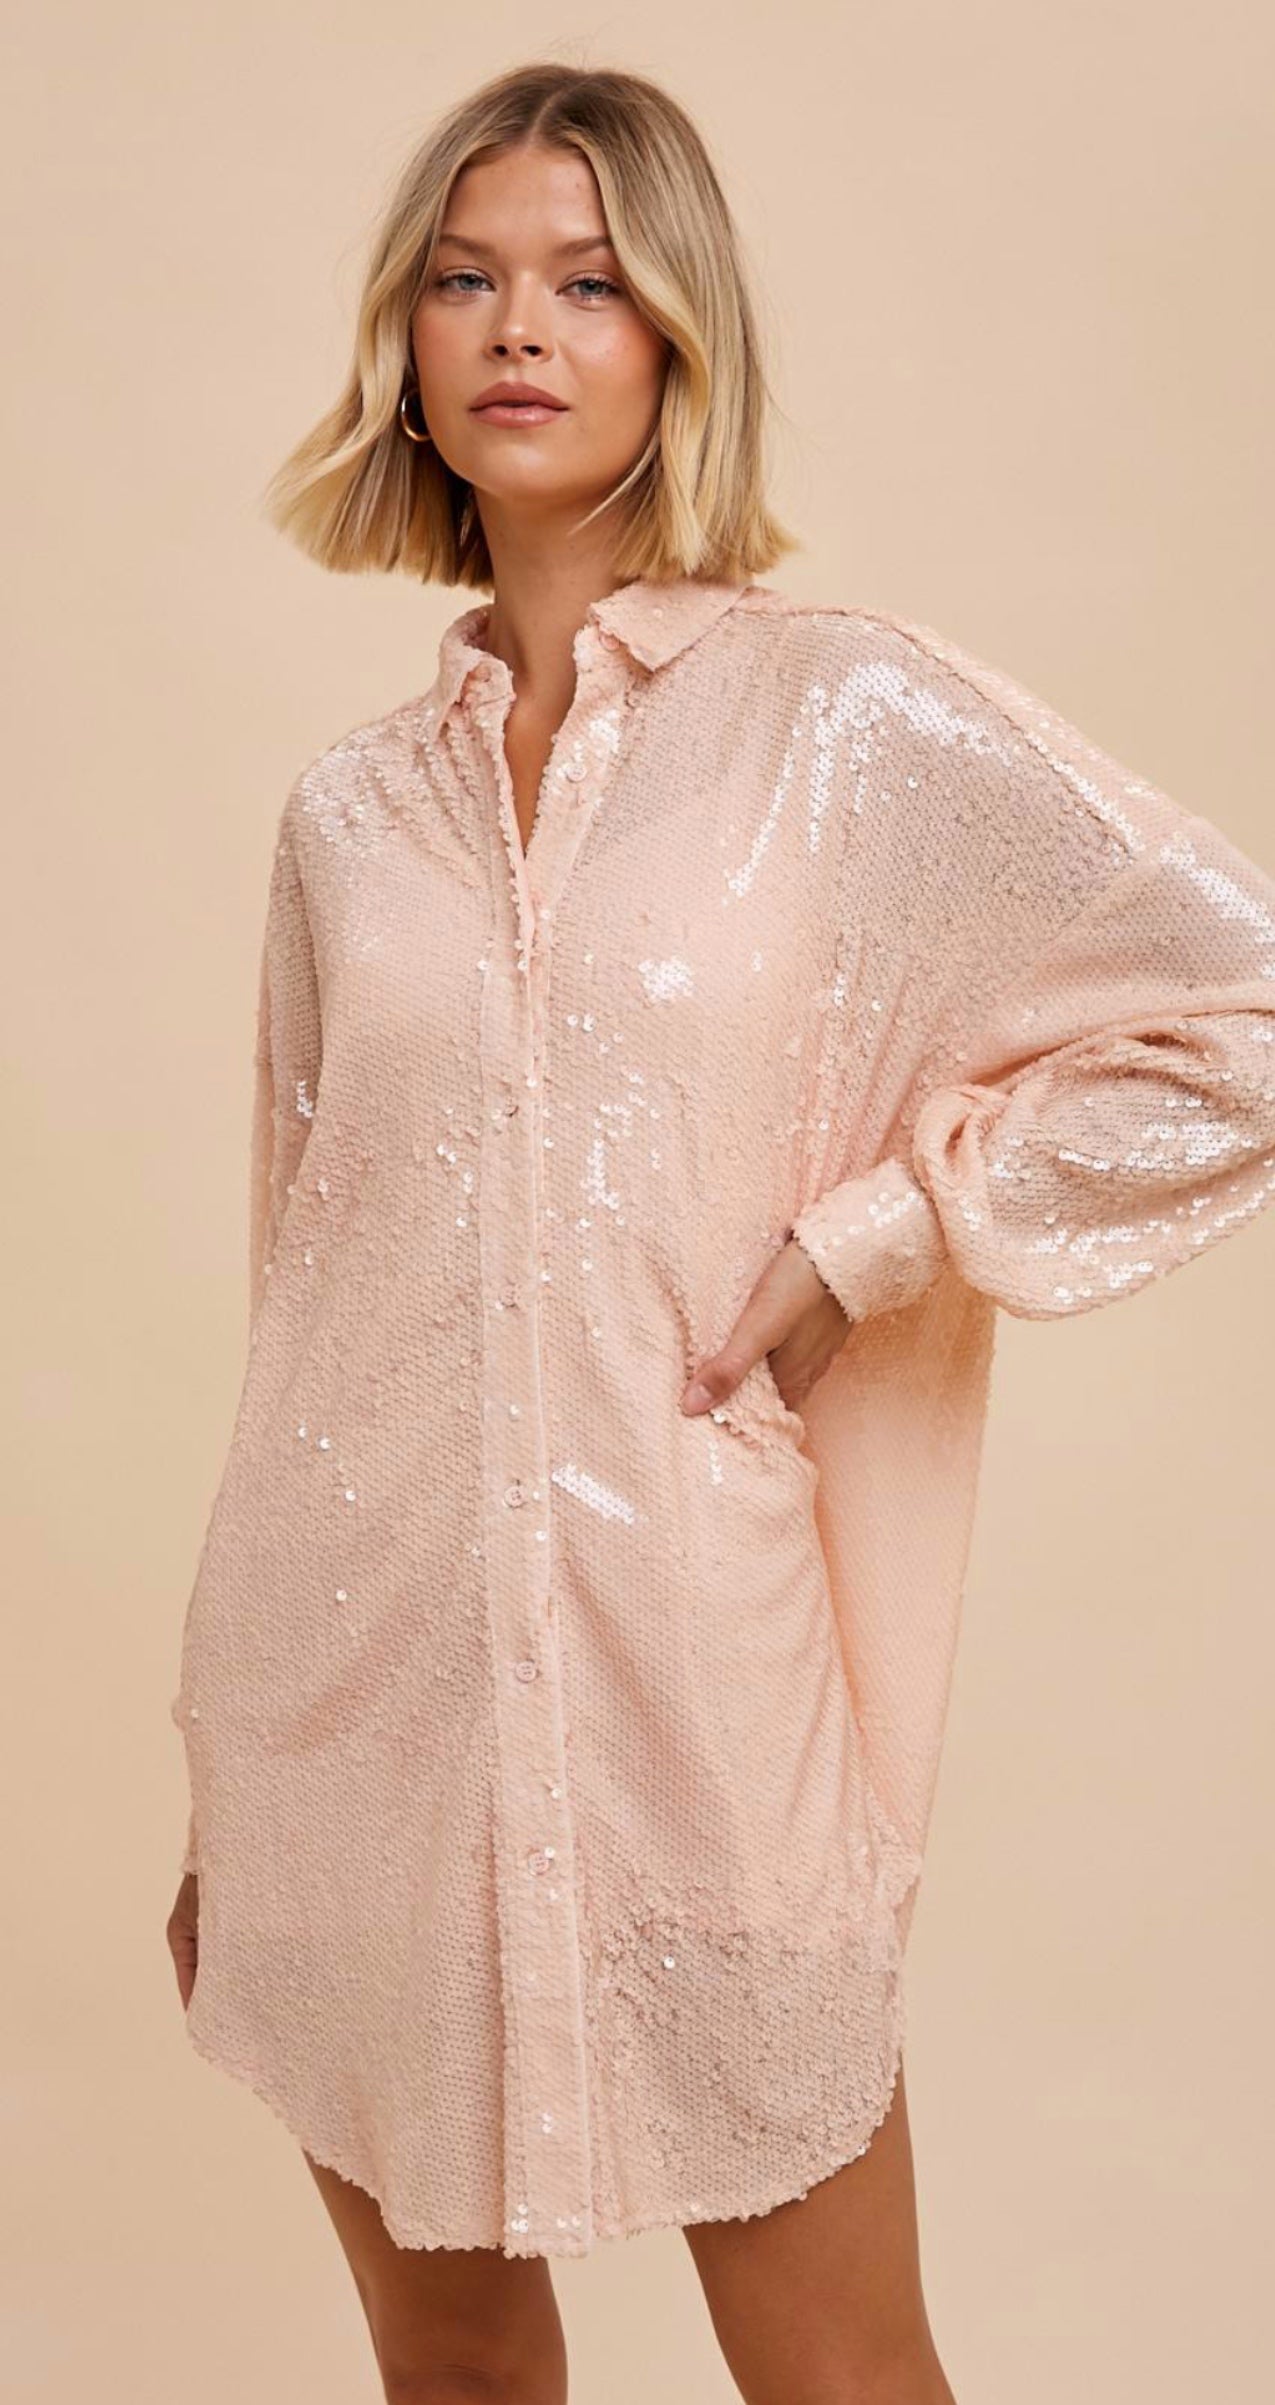 Sequin Shirt Dress - Out of the Blue